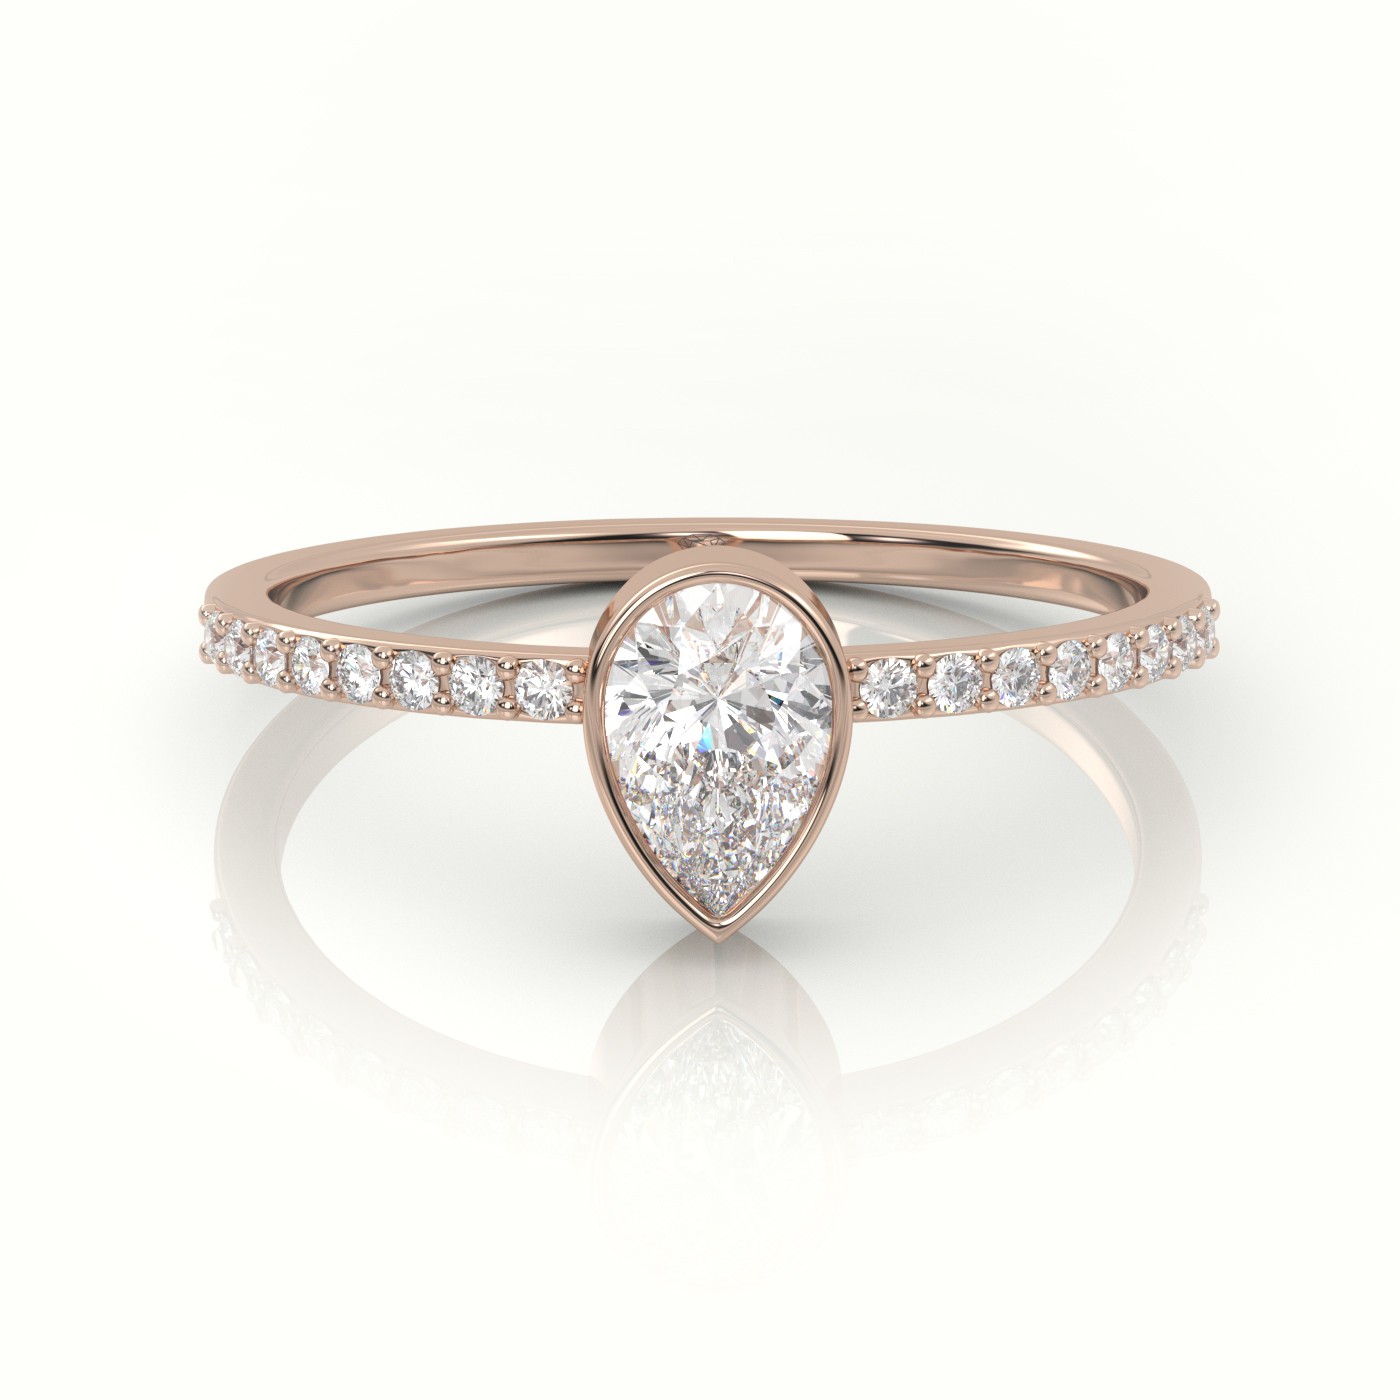 18K ROSE GOLD PEAR CUT DIAMOND CHANNEL SETTING ENGAGEMENT RING